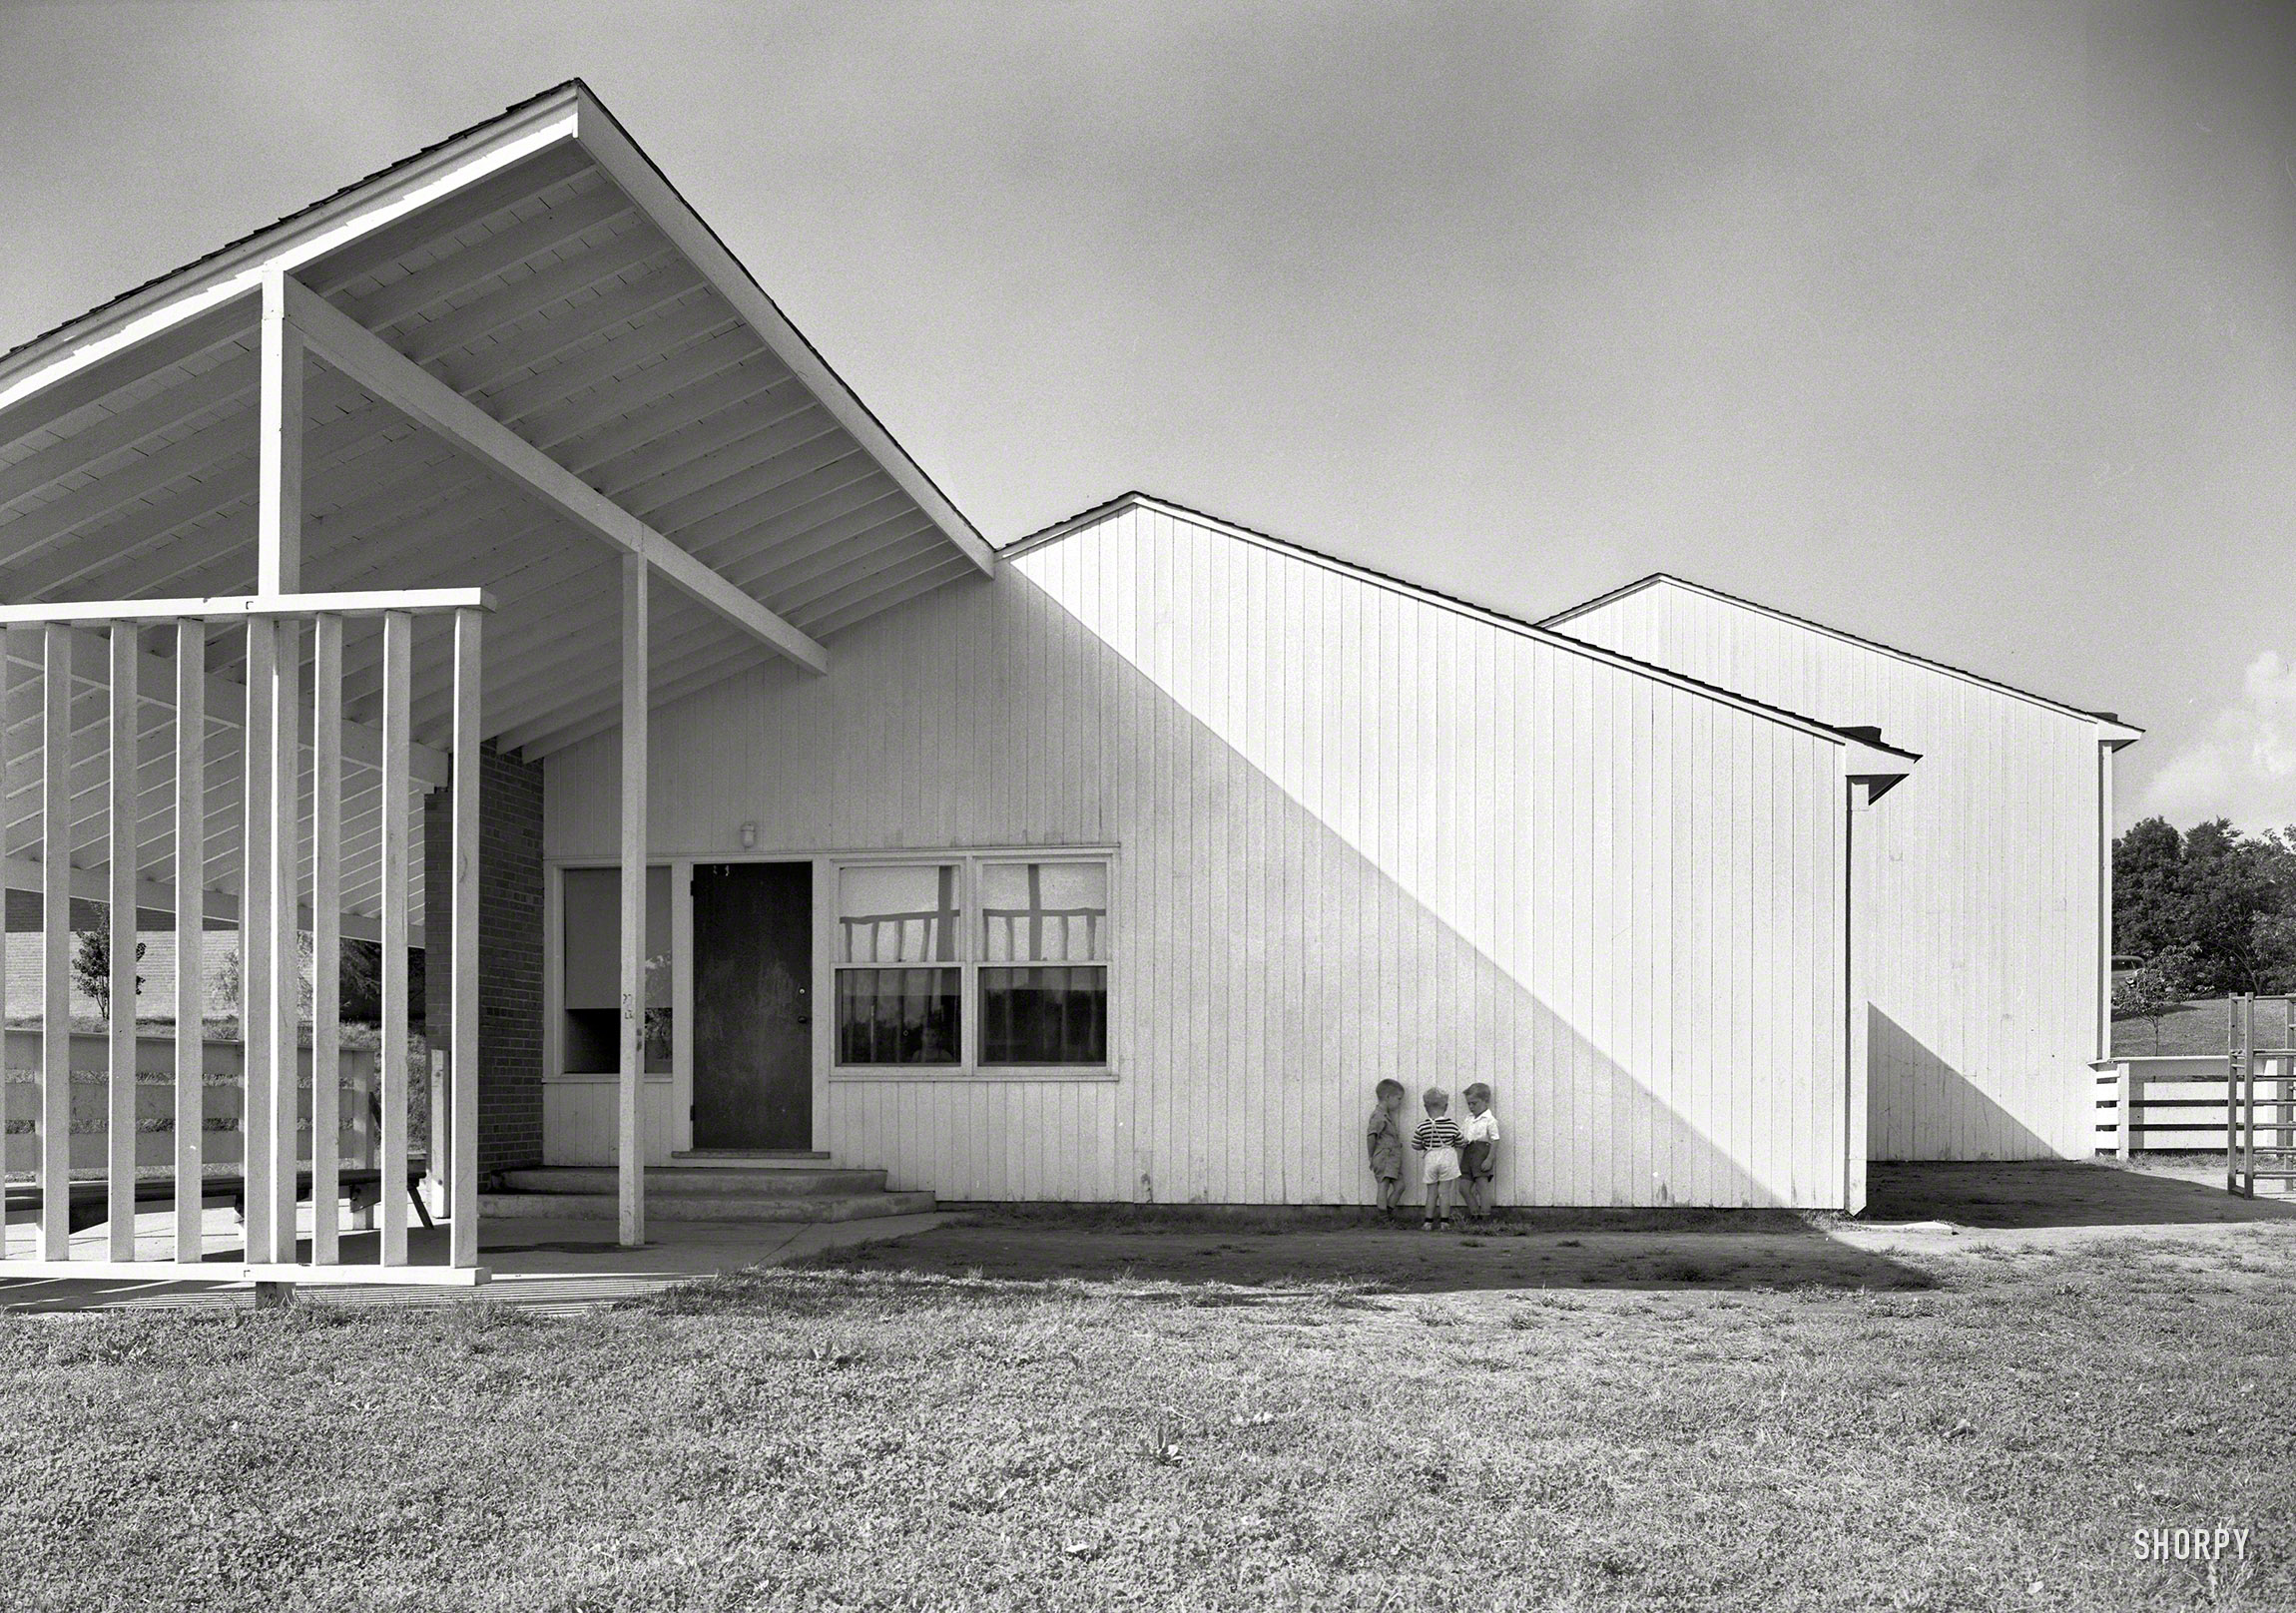 Sept. 25, 1945. "Pine Ford Acres Community Building, Middletown, Pennsylvania. Detail III. Louis I. Kahn, architect." Part of a 450-unit residential development built on 51 acres for the Federal Works Agency and Federal Public Housing Authority. Large-format negative by Gottscho-Schleisner. View full size.